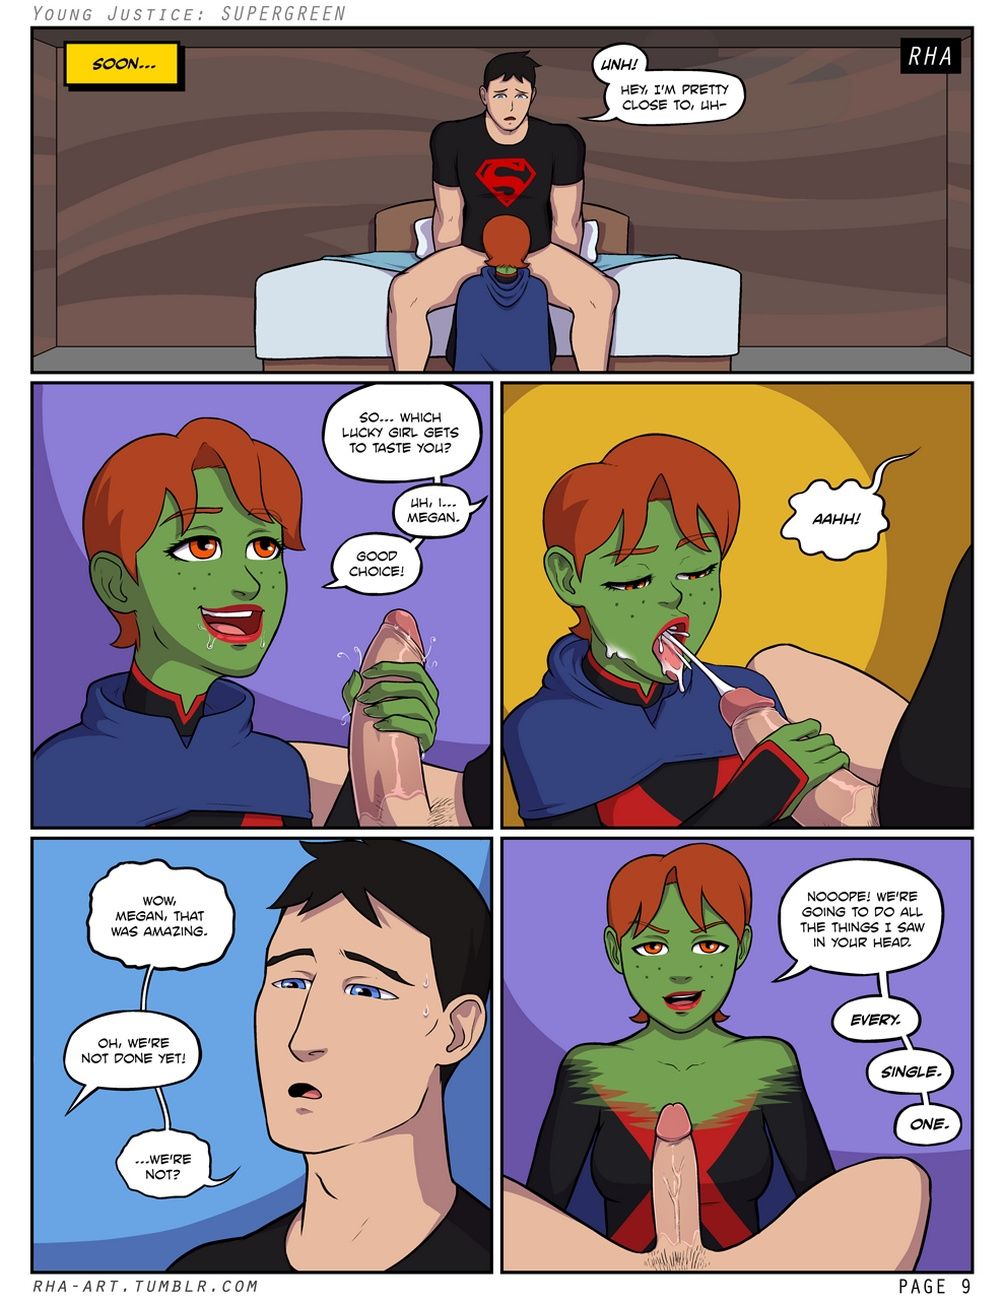 Young Justice - Supergreen page 10